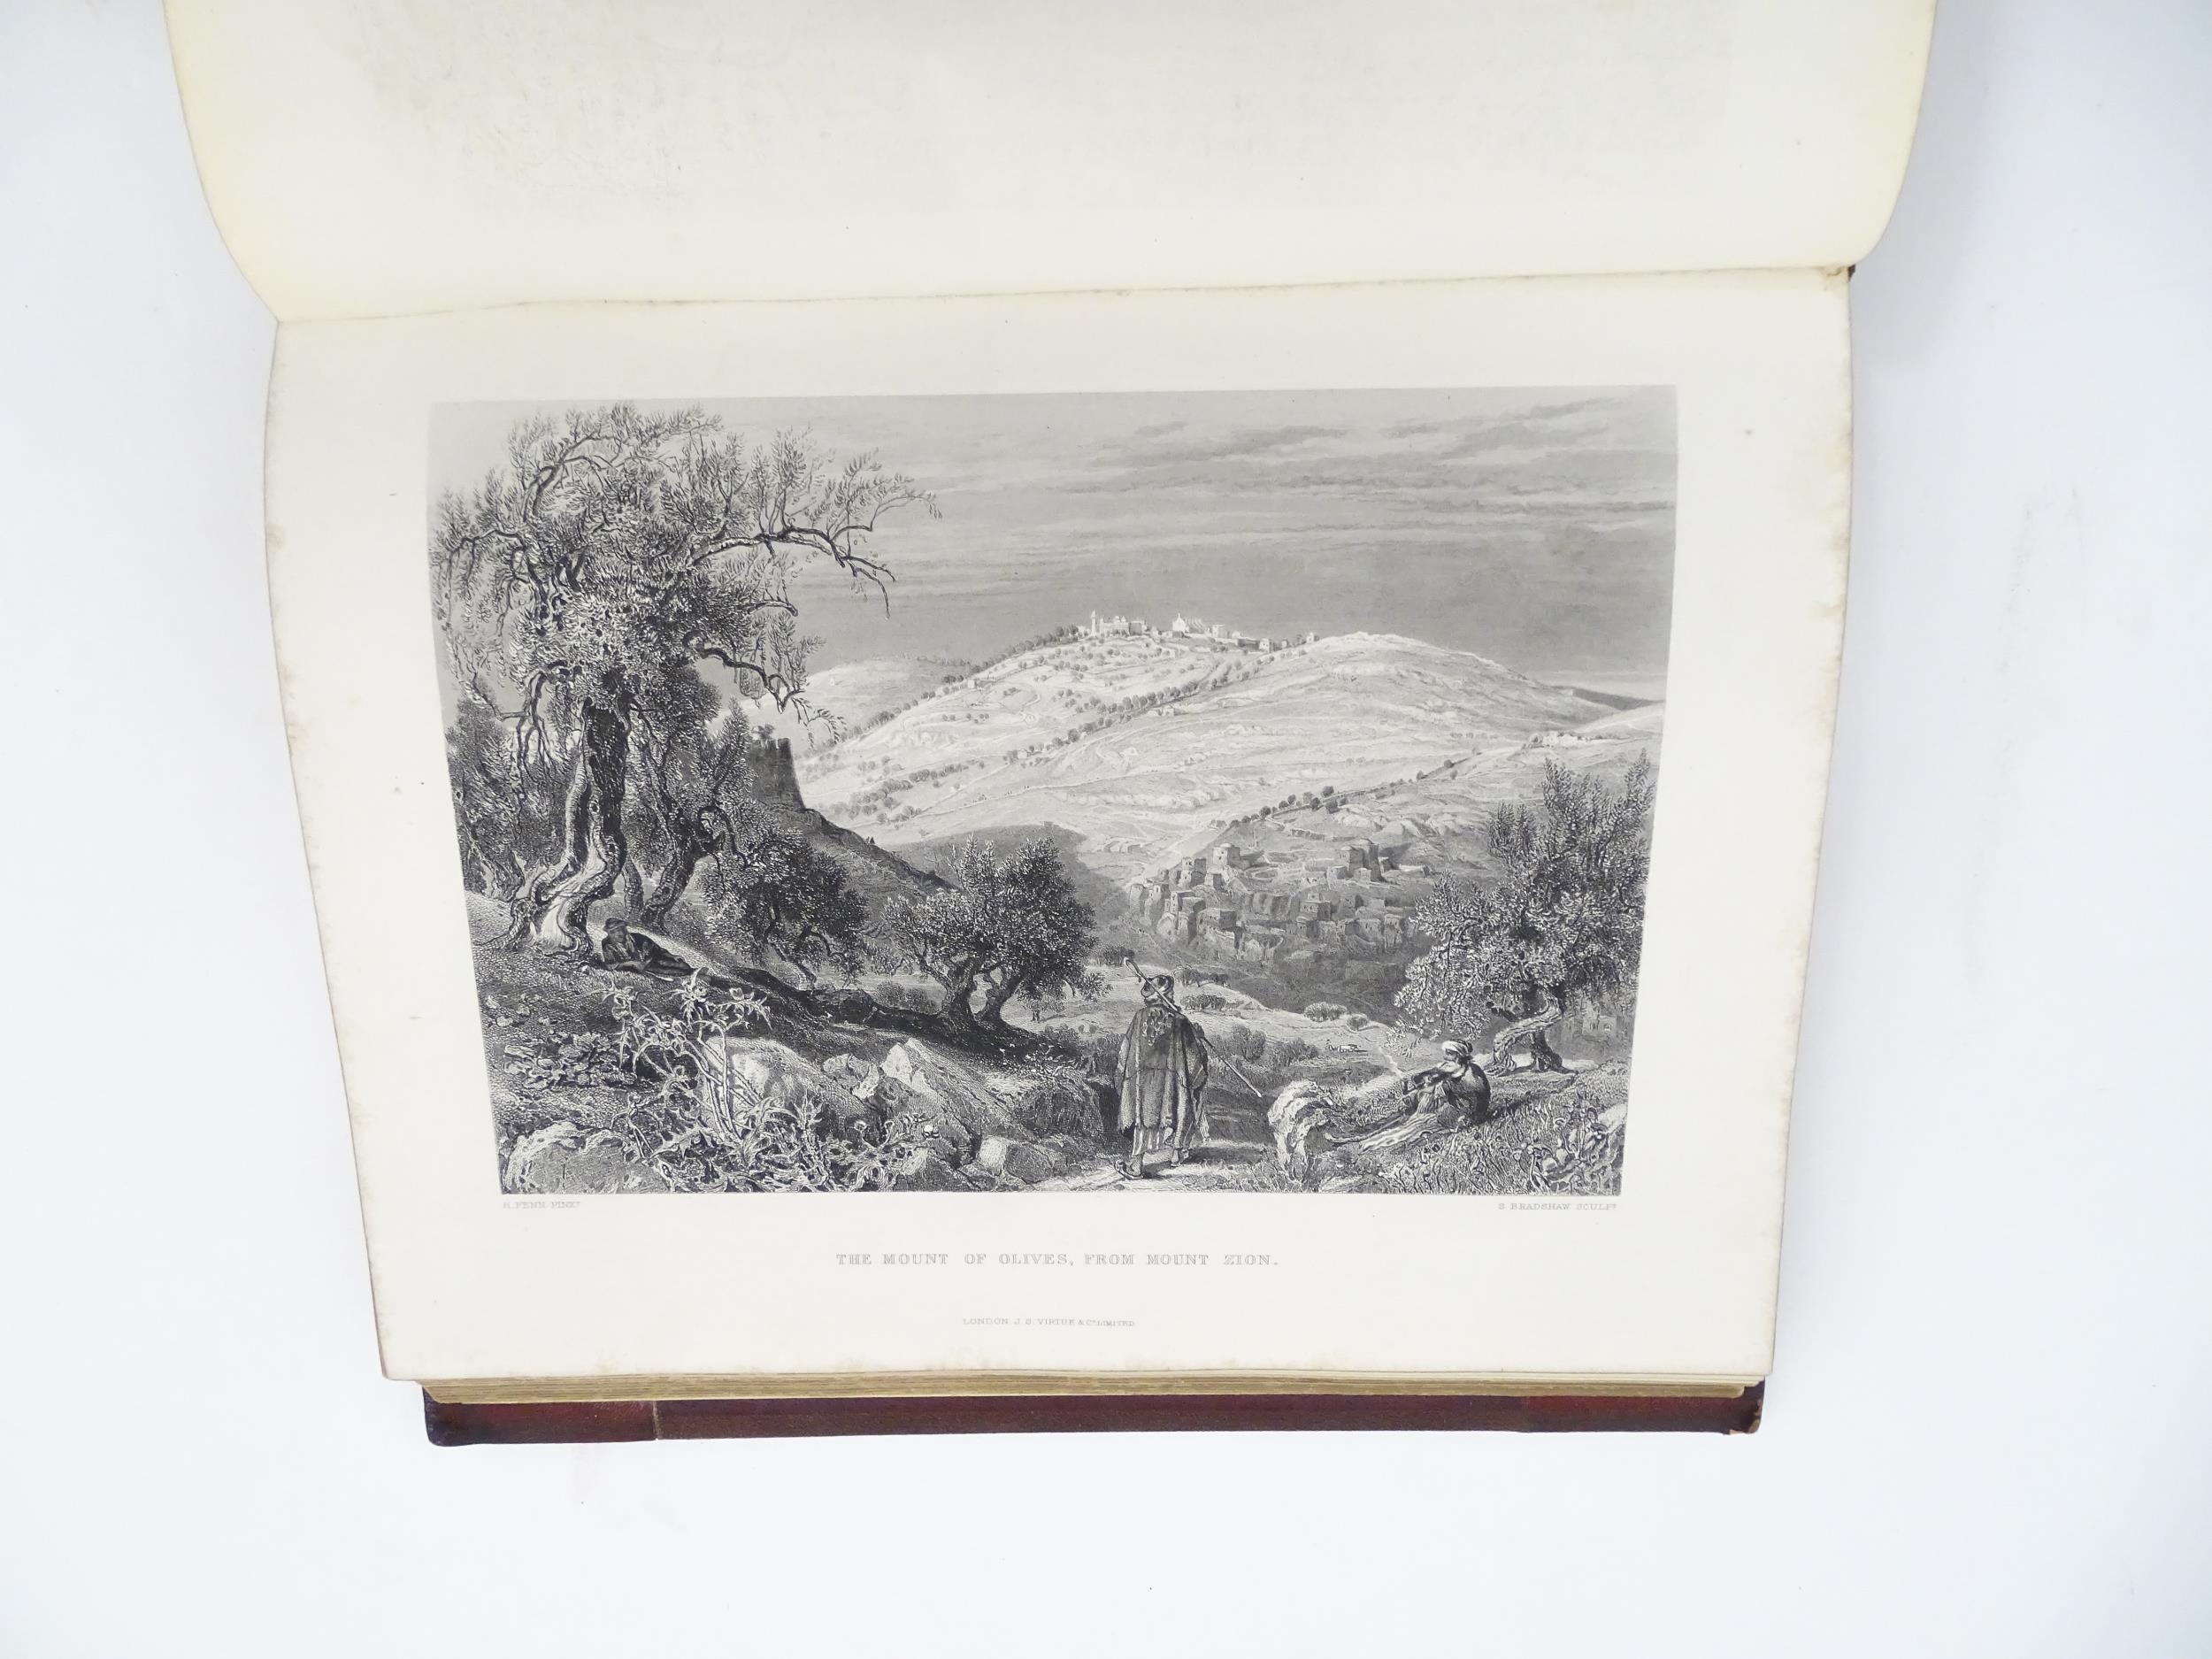 Book: Picturesque Palestine - Sinai and Egypt, volume 1, edited by Sir Charles Wilson. Published - Image 7 of 7